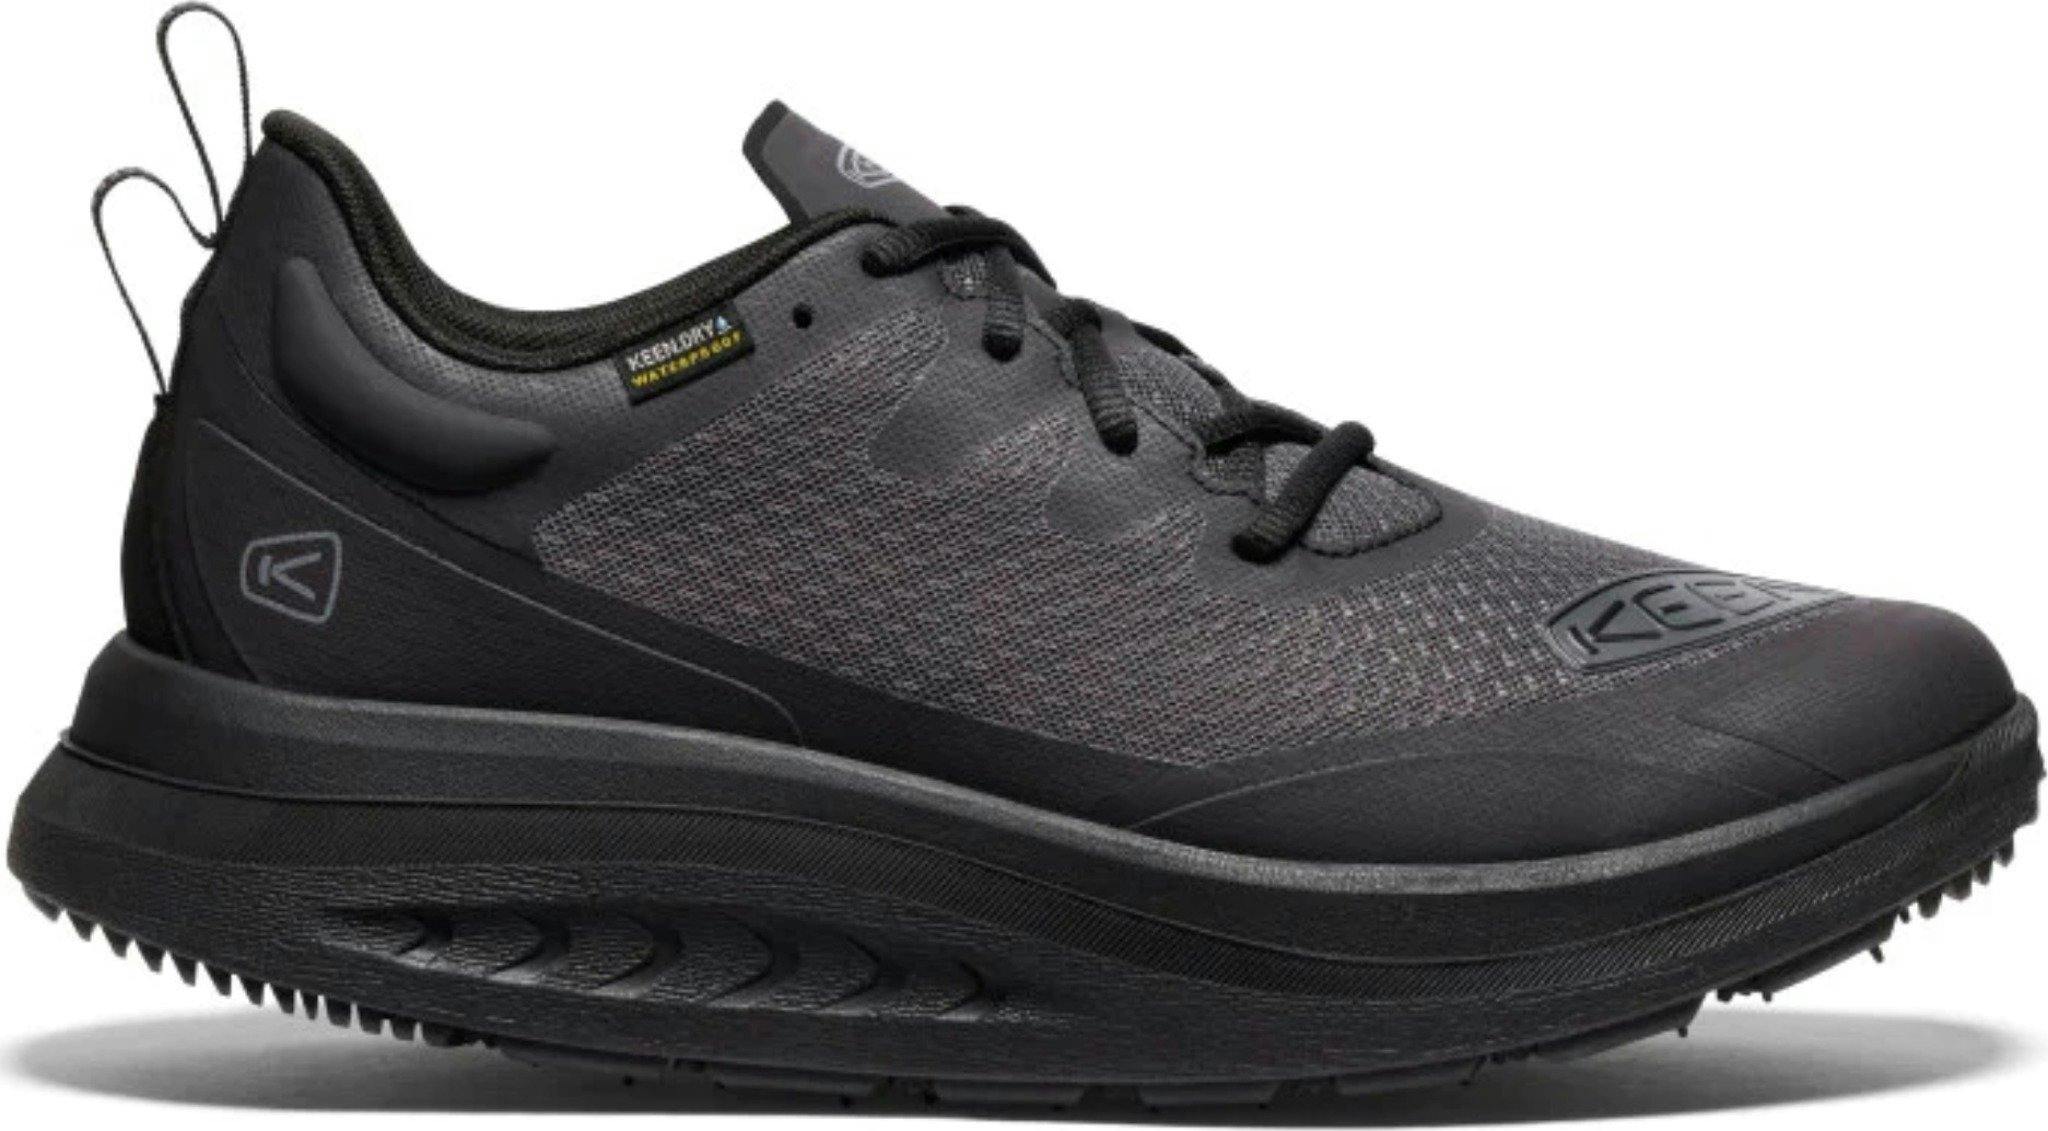 Product image for WK400 Waterproof Walking Shoes - Men's